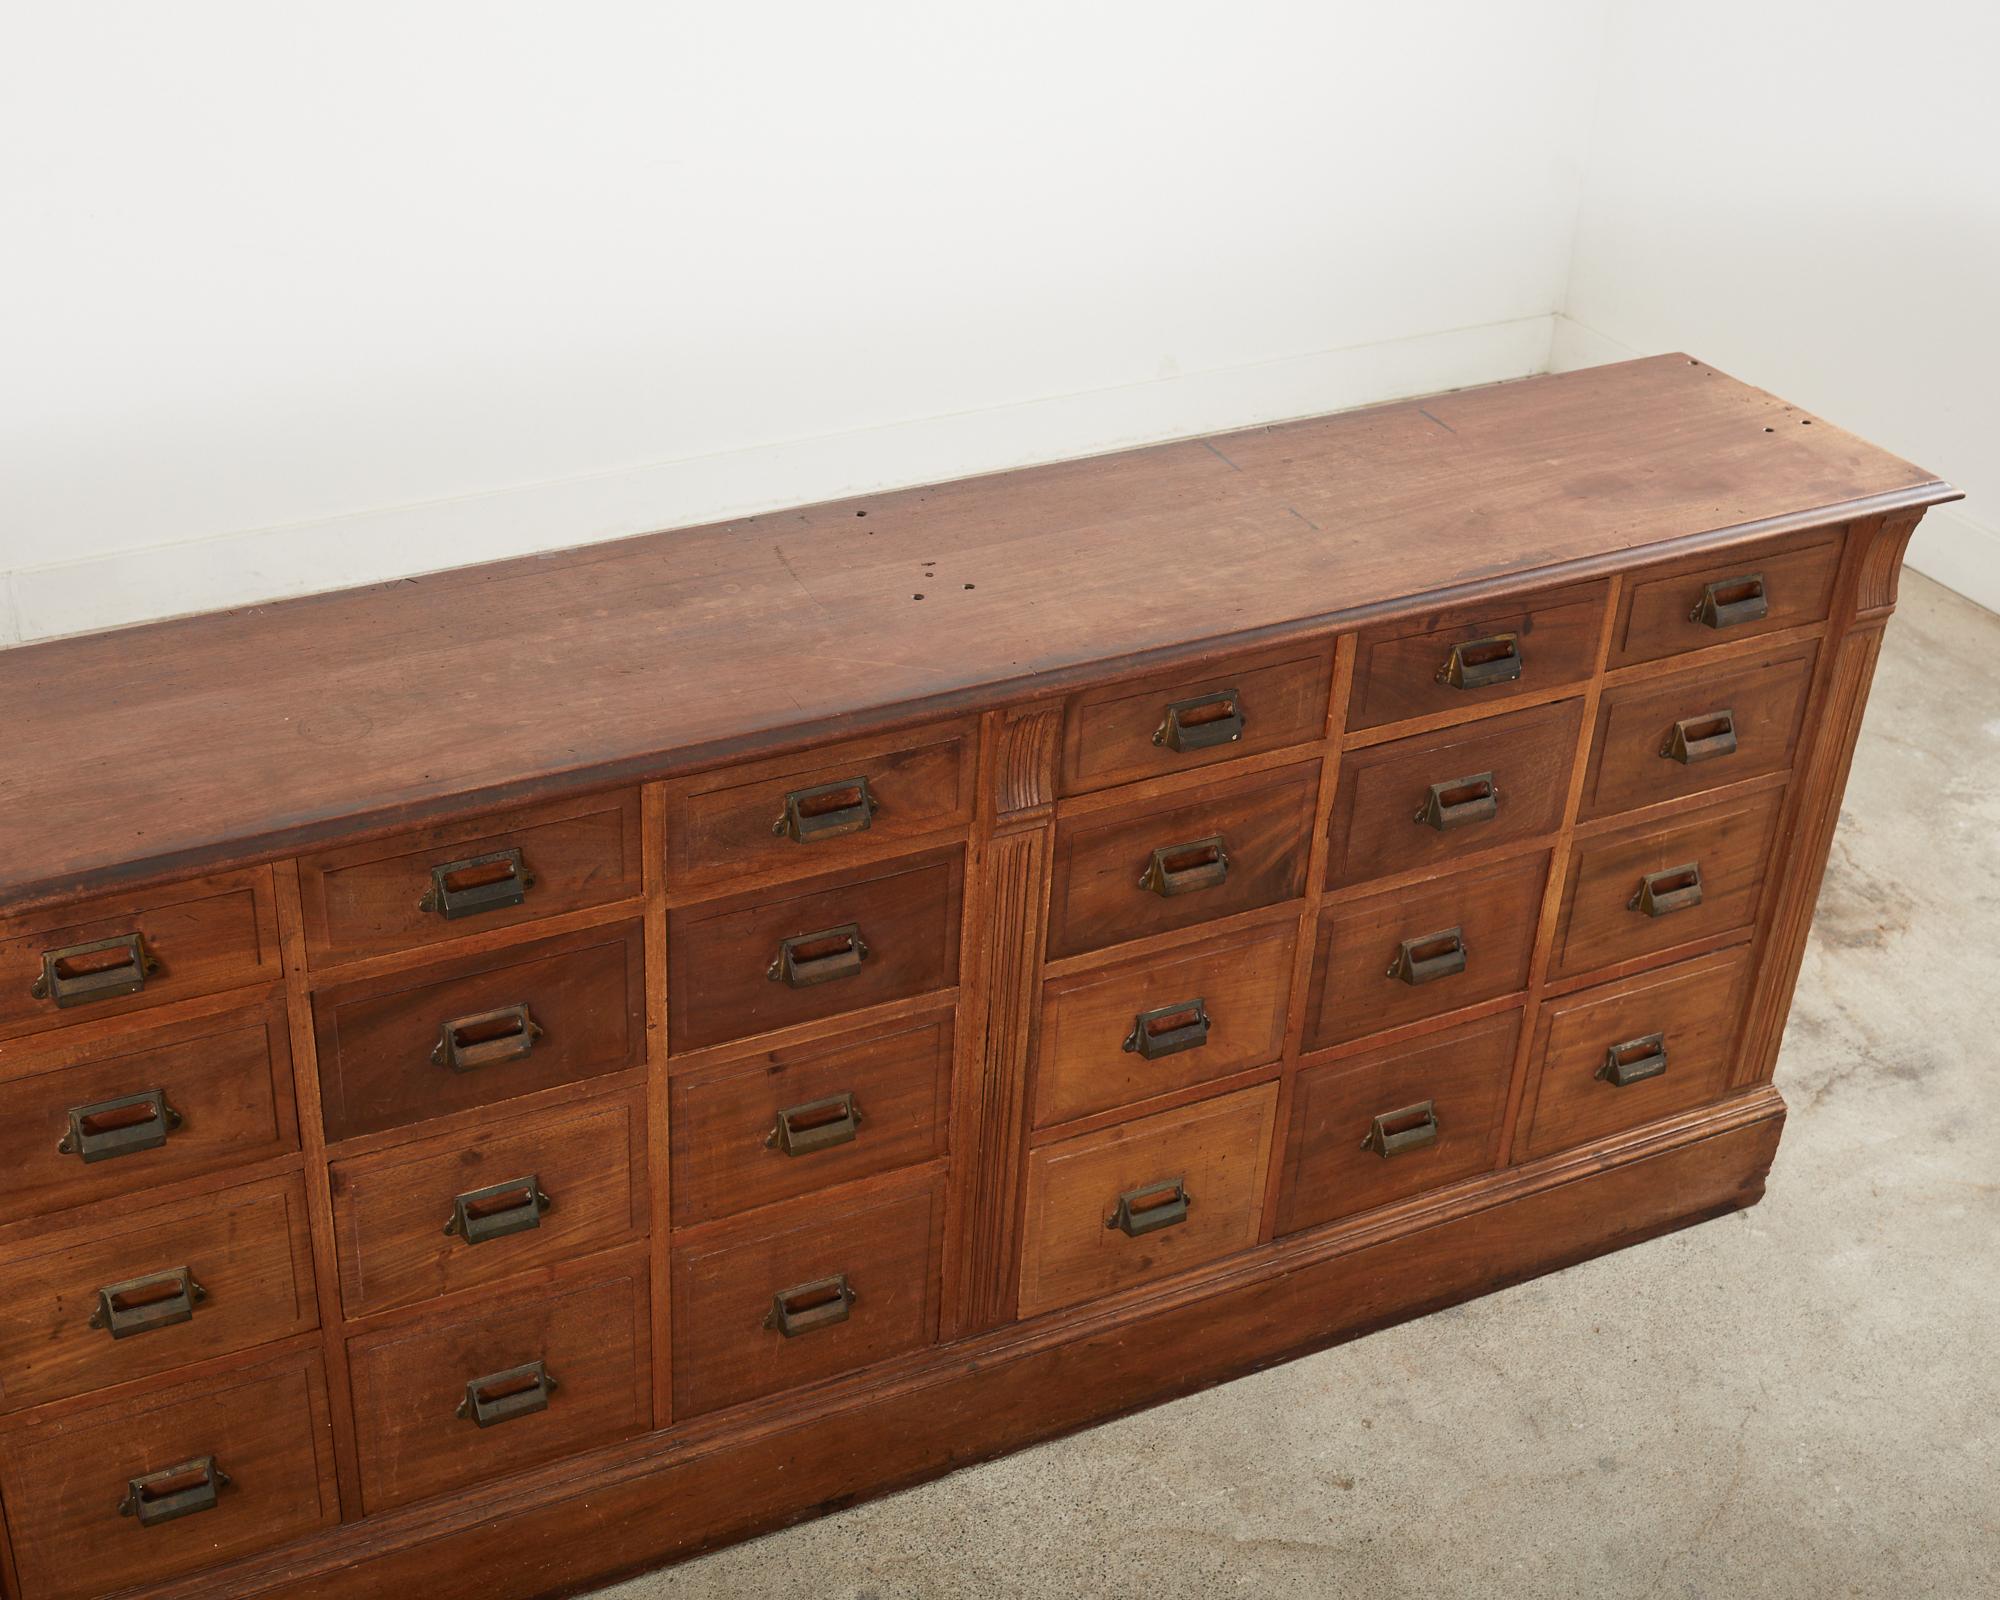 Hand-Crafted 19th Century English Millinery Haberdashery Hardwood Apothecary Cabinet  For Sale